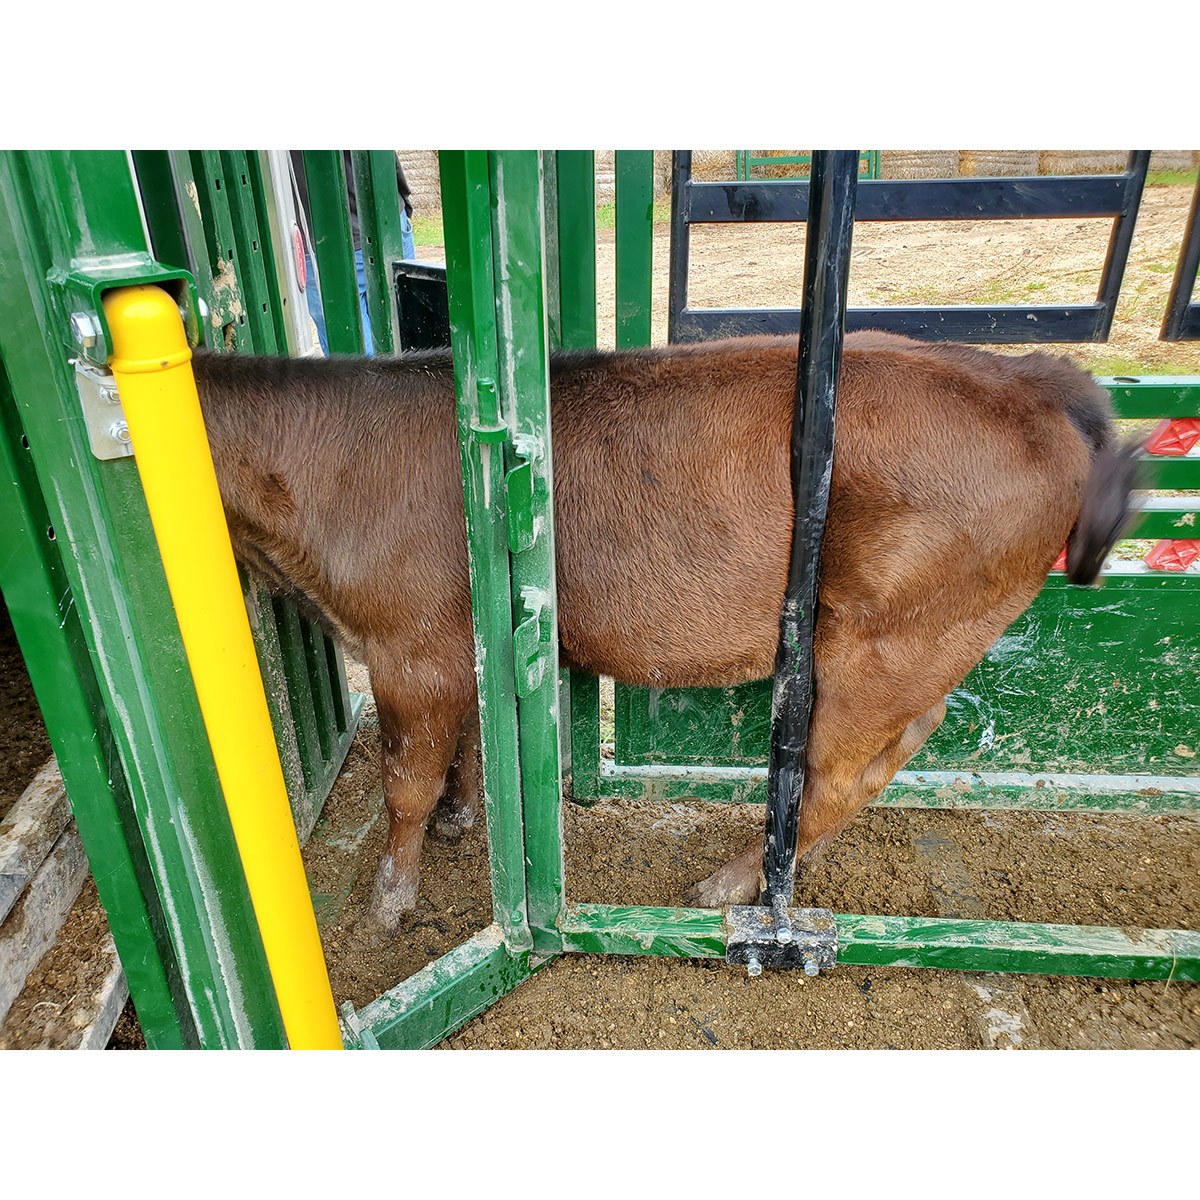 Calf being restrained by calf restrainer bar in Arrowquip chute